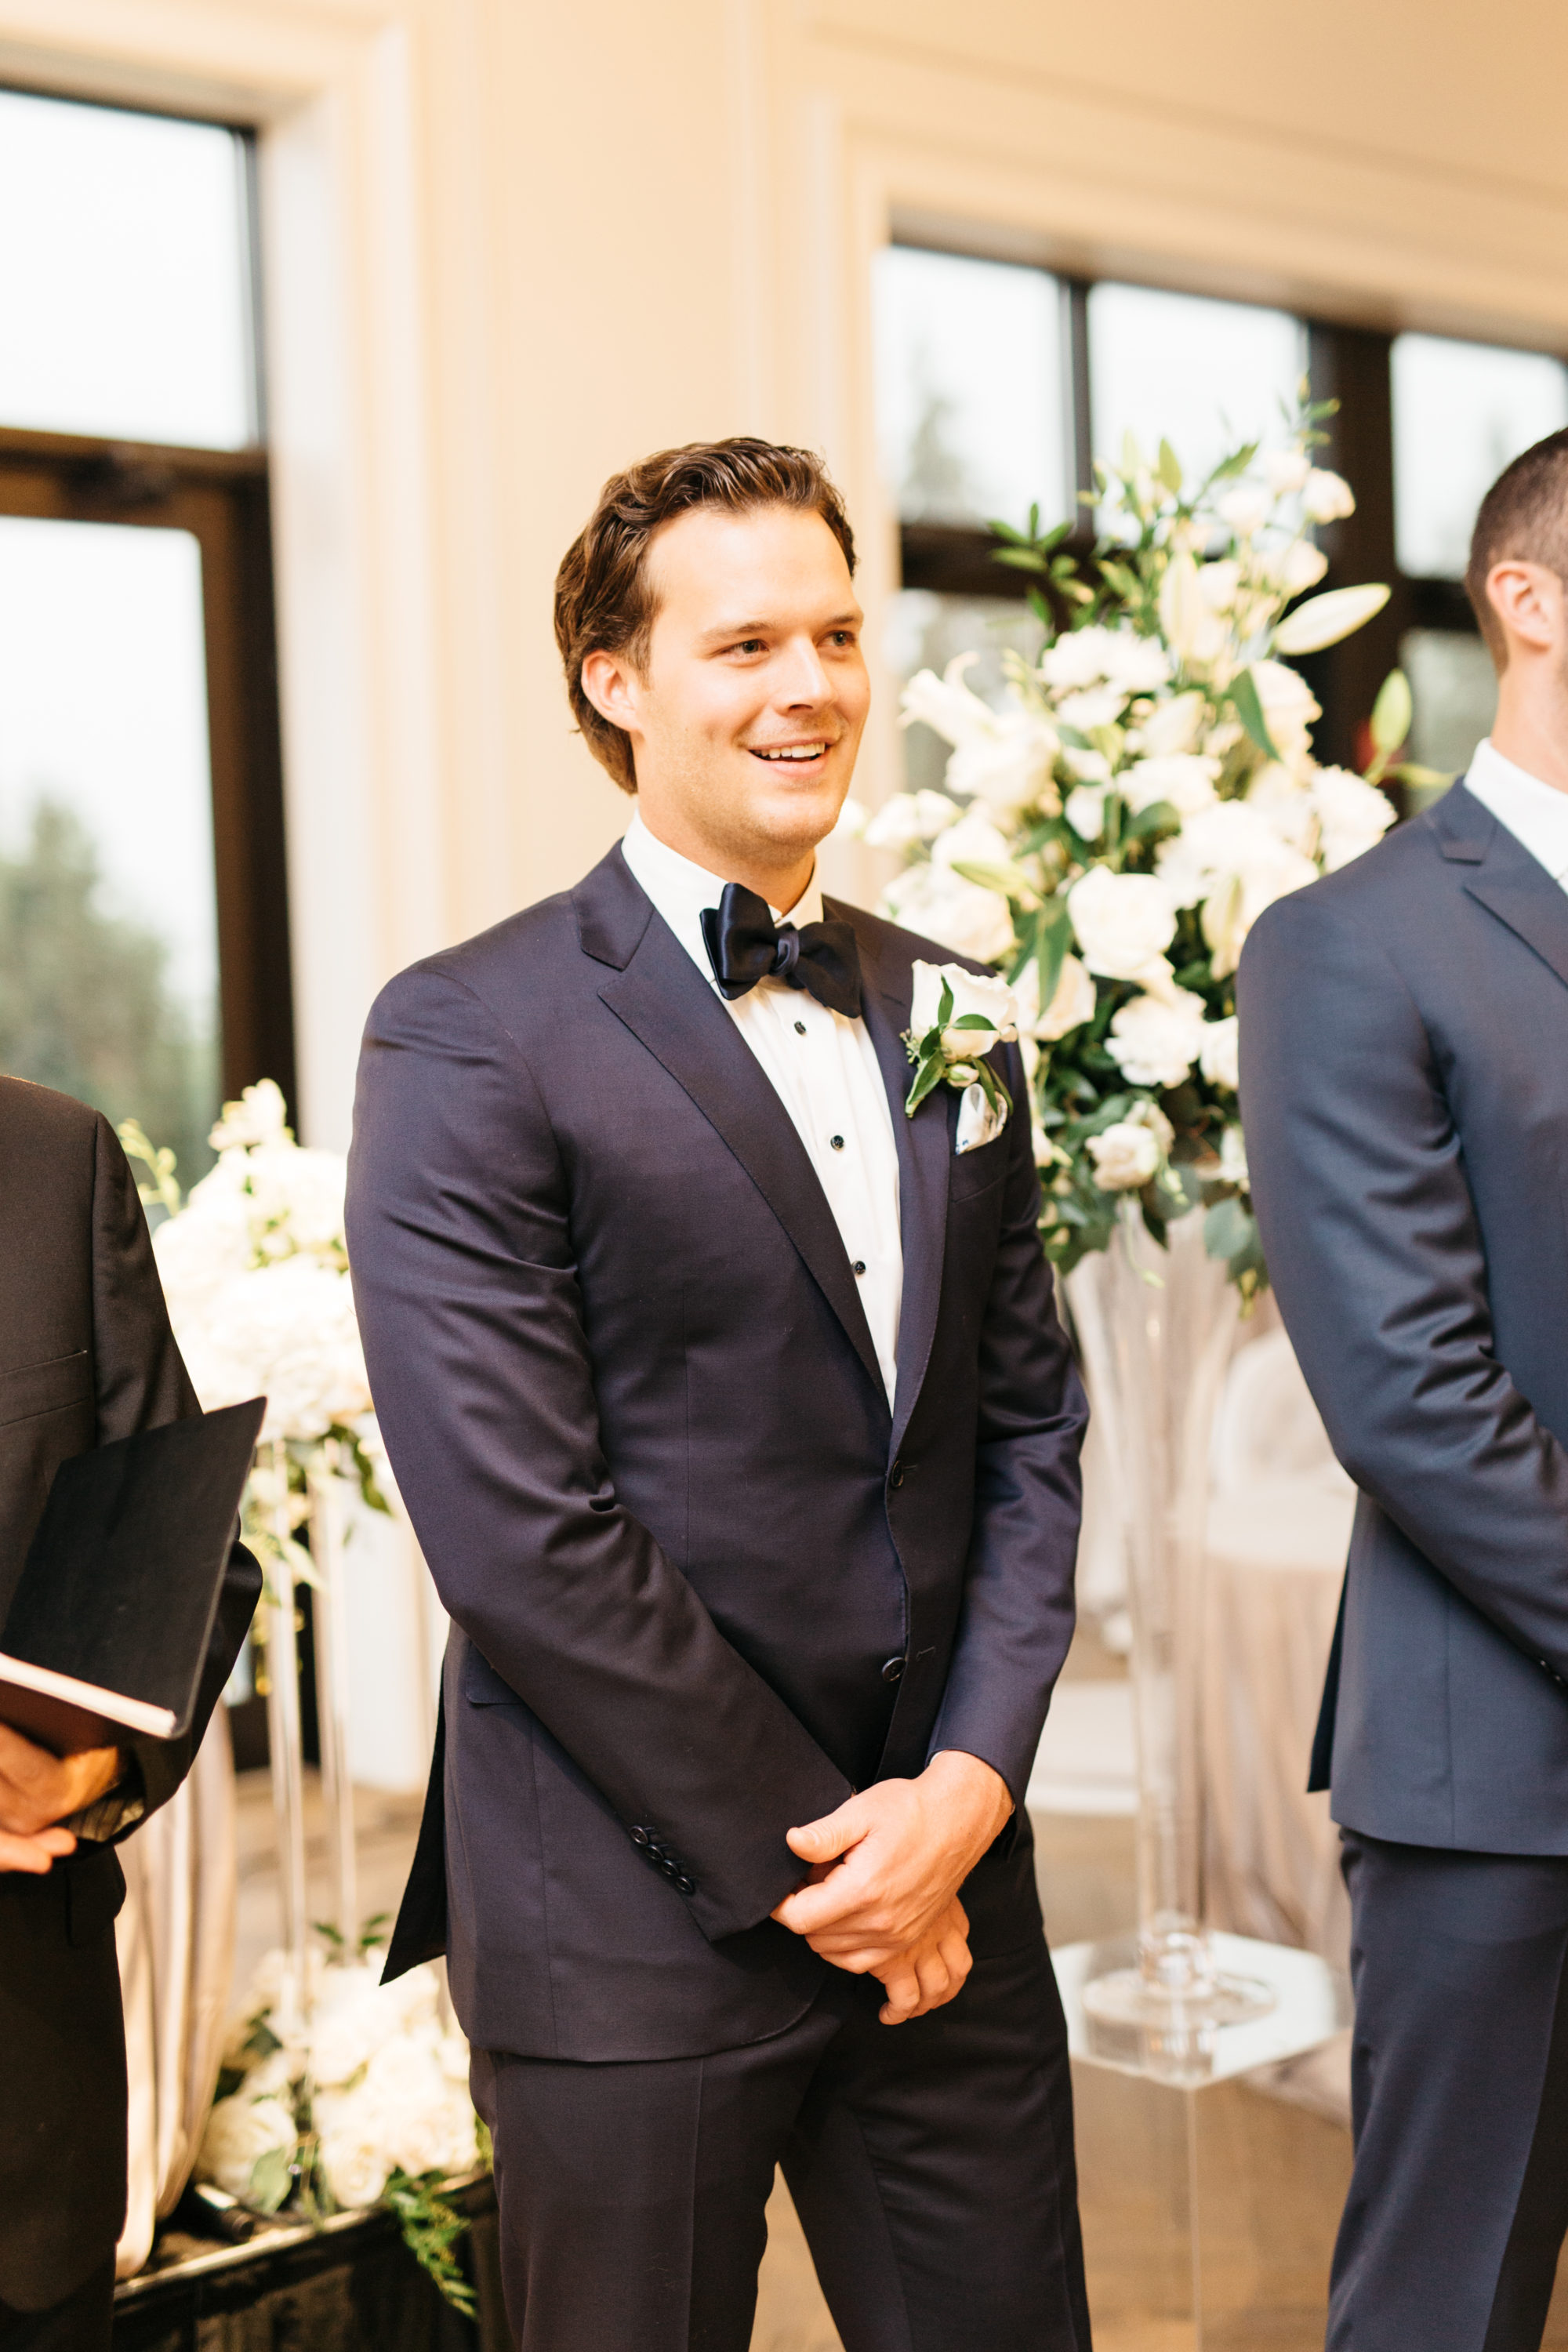 Groom seeing his bride for the first time